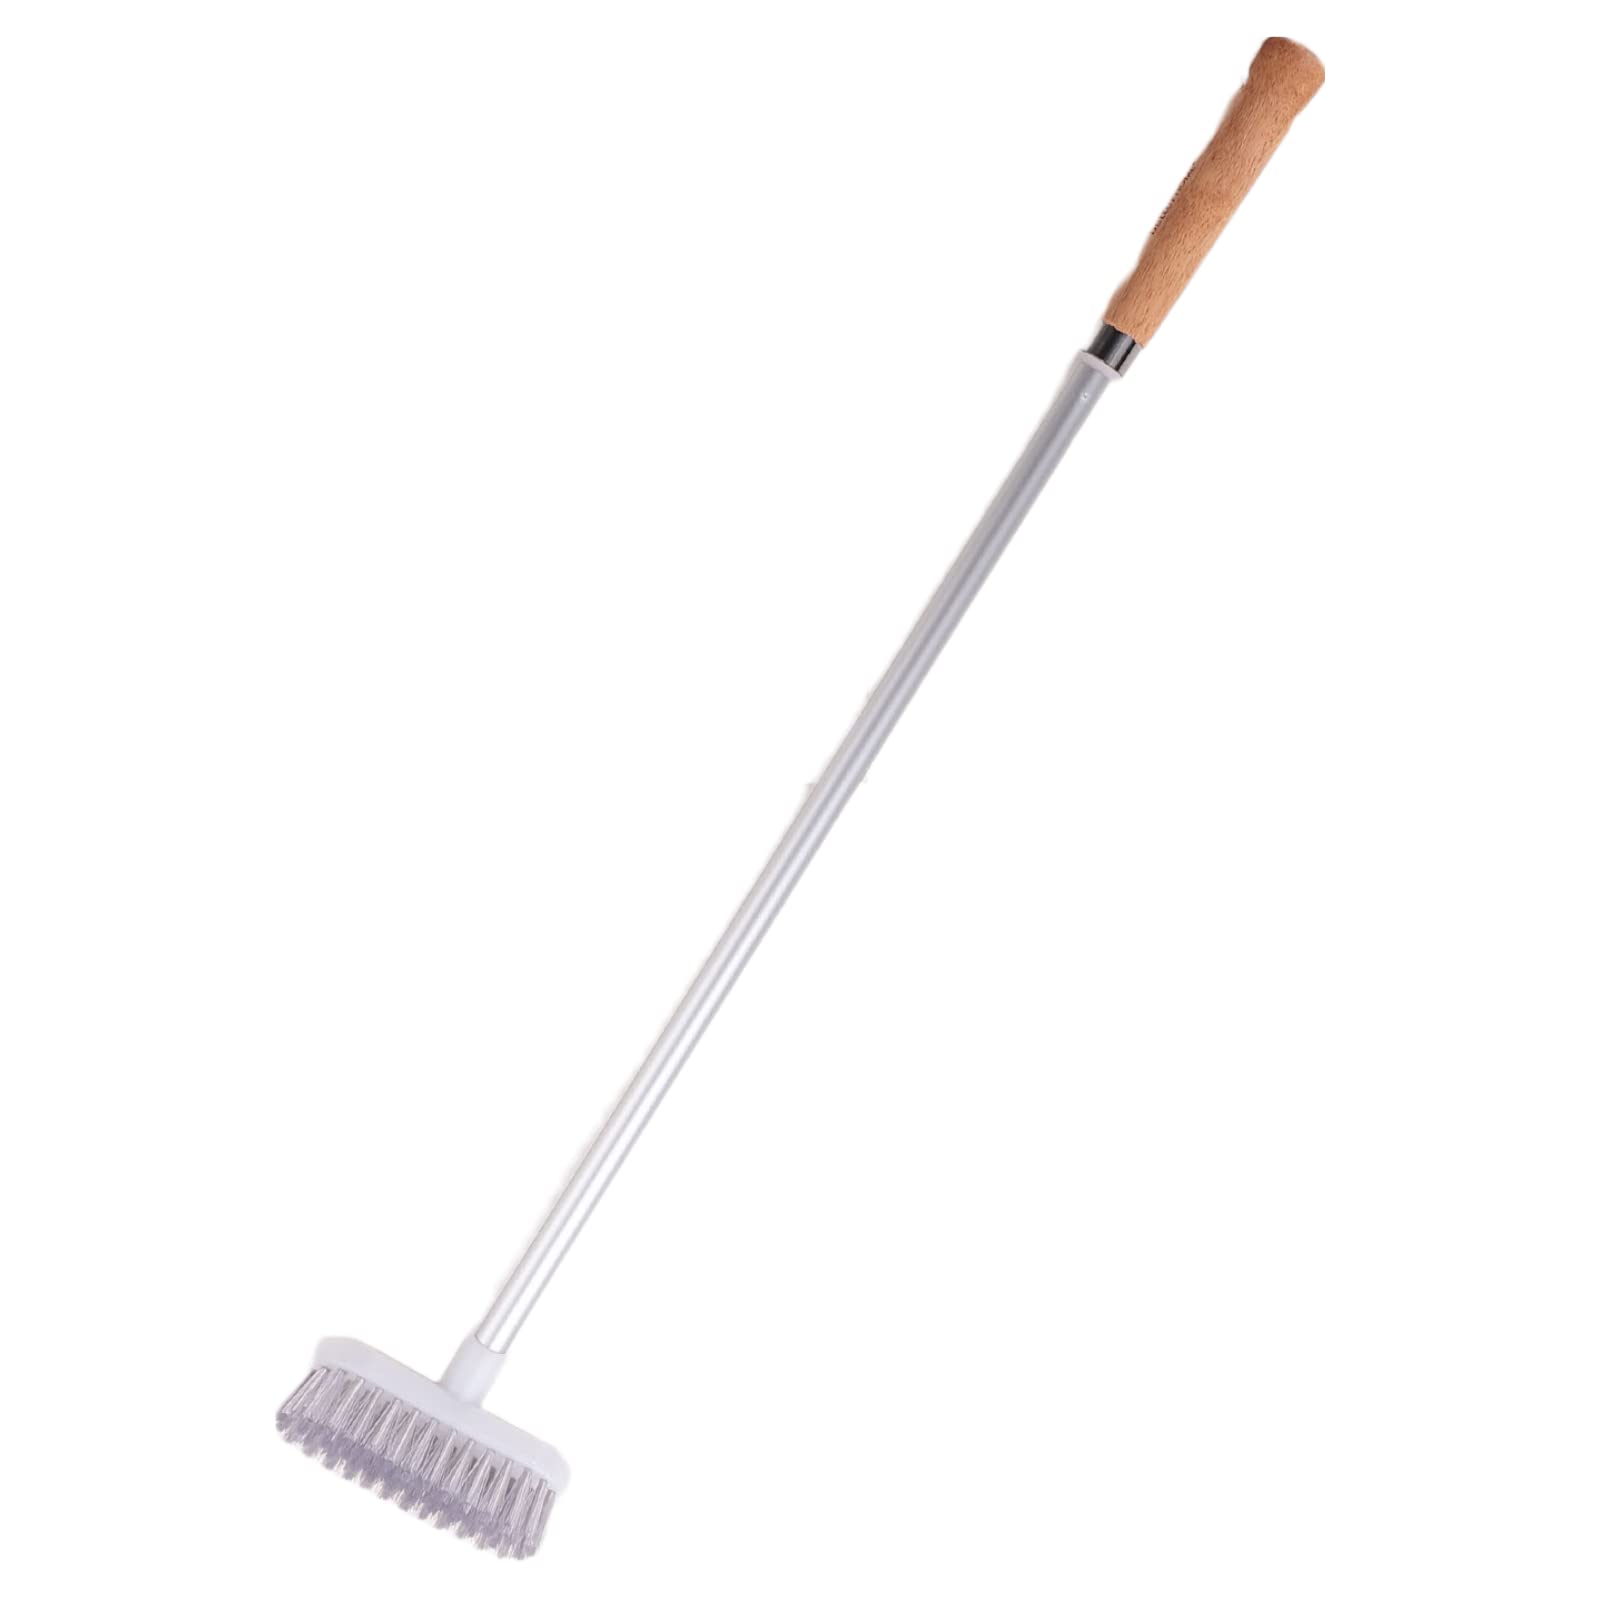  Home-X - Track Cleaning Brush with Built-in Bottle